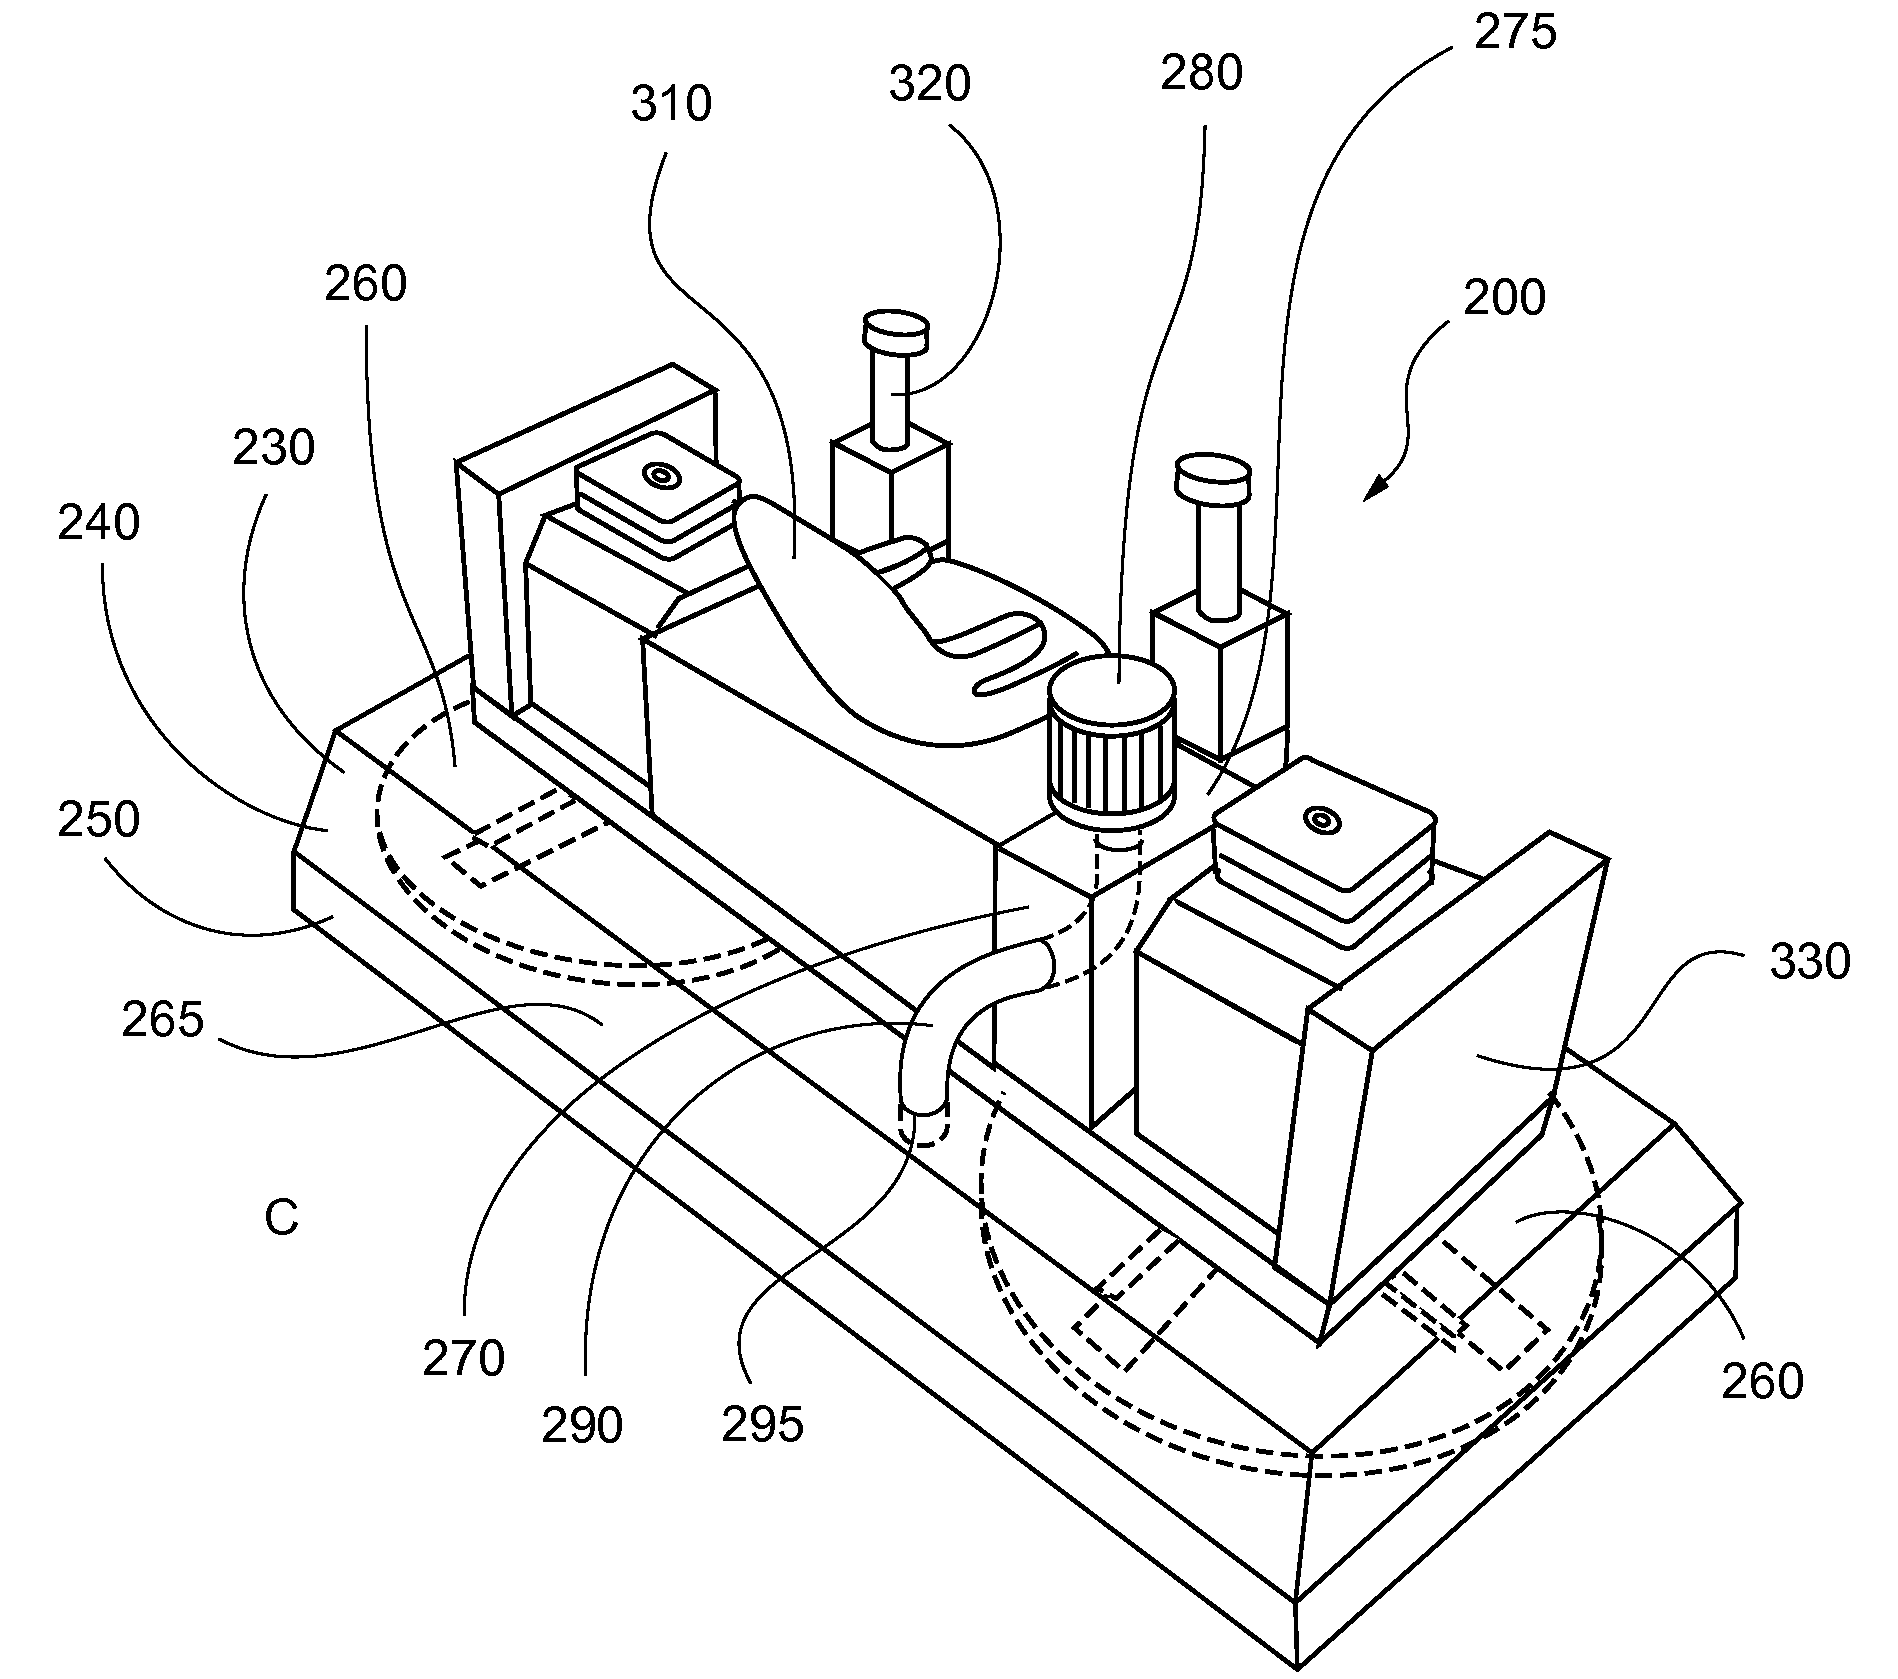 Apparatus and method for surface finishing cured concrete